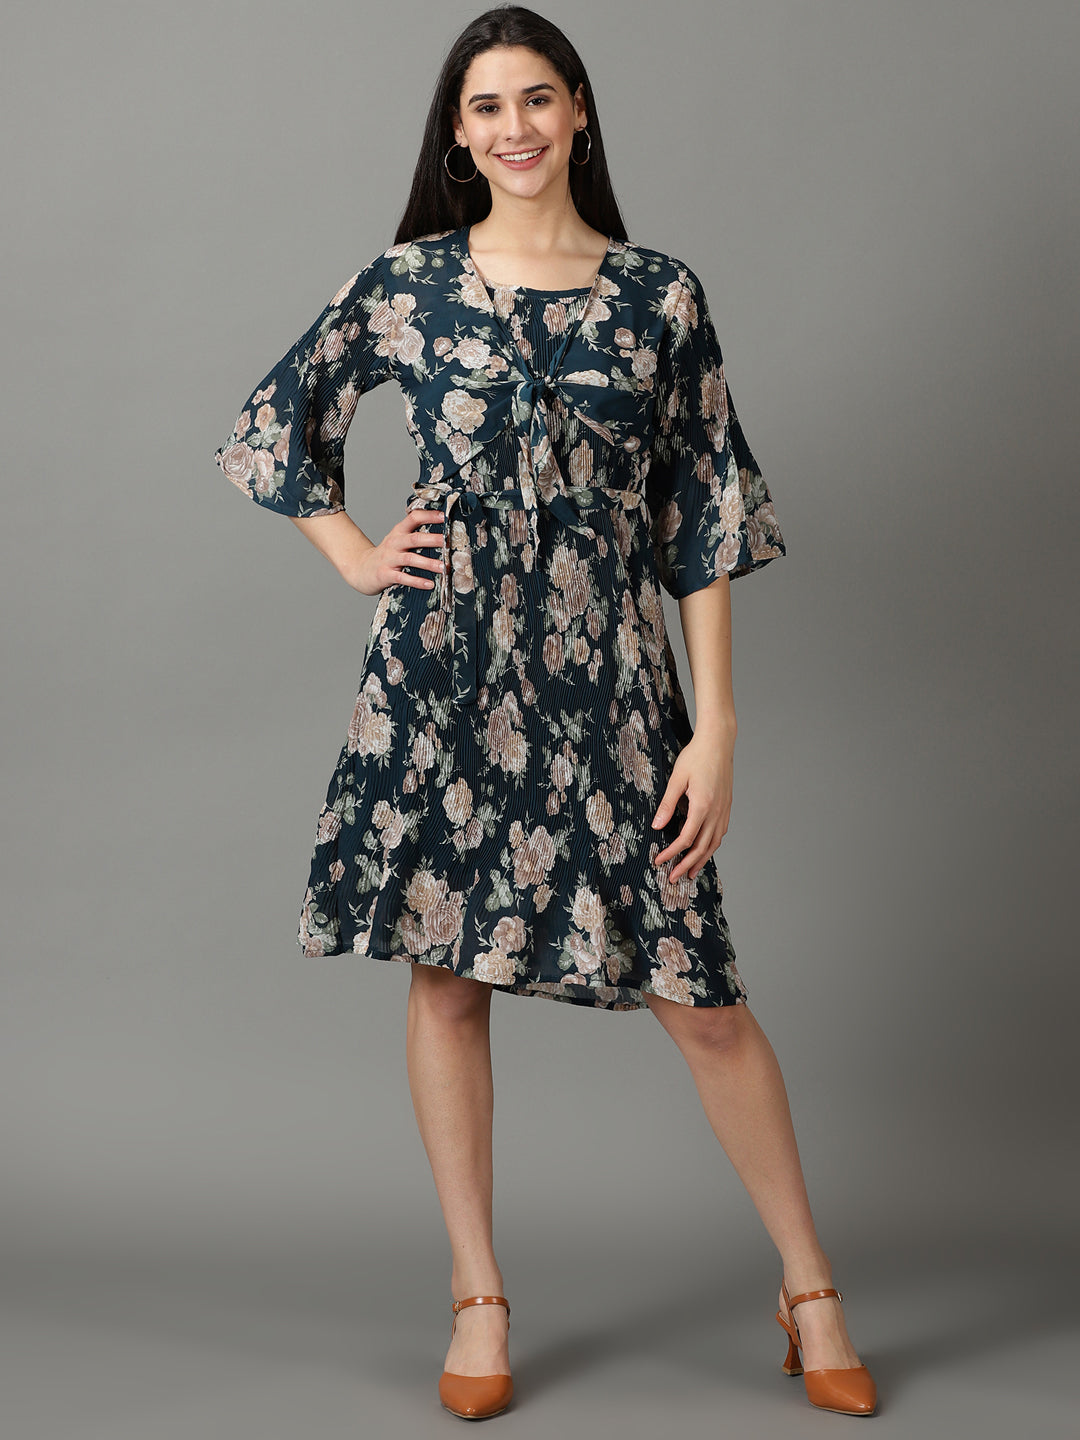 Women's Teal Printed Fit and Flare Dress